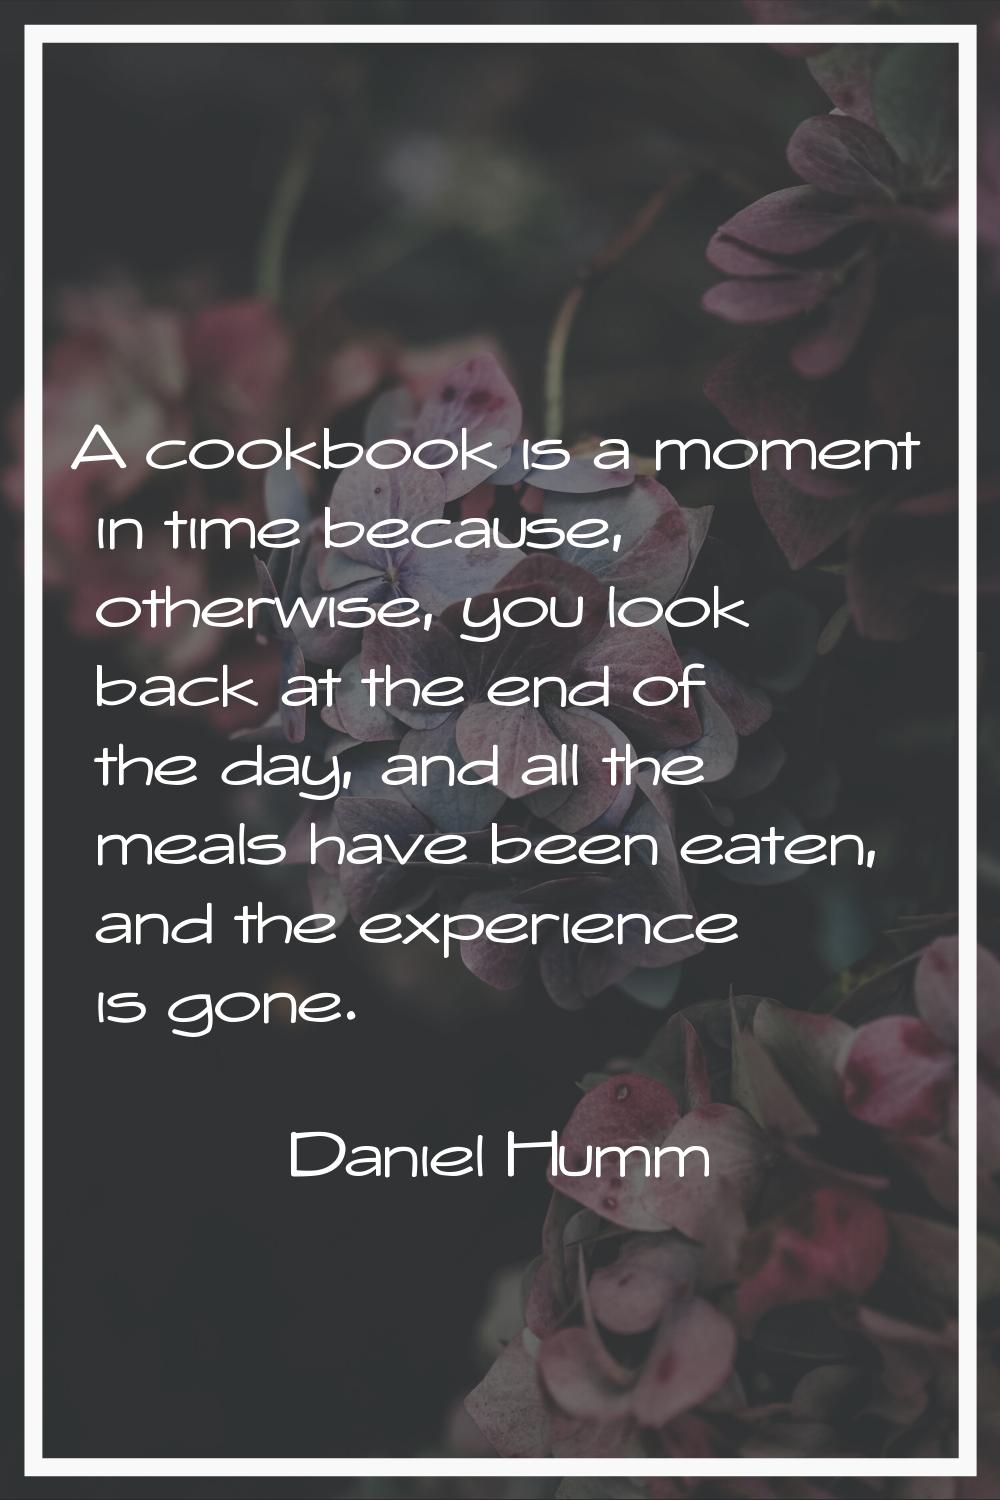 A cookbook is a moment in time because, otherwise, you look back at the end of the day, and all the